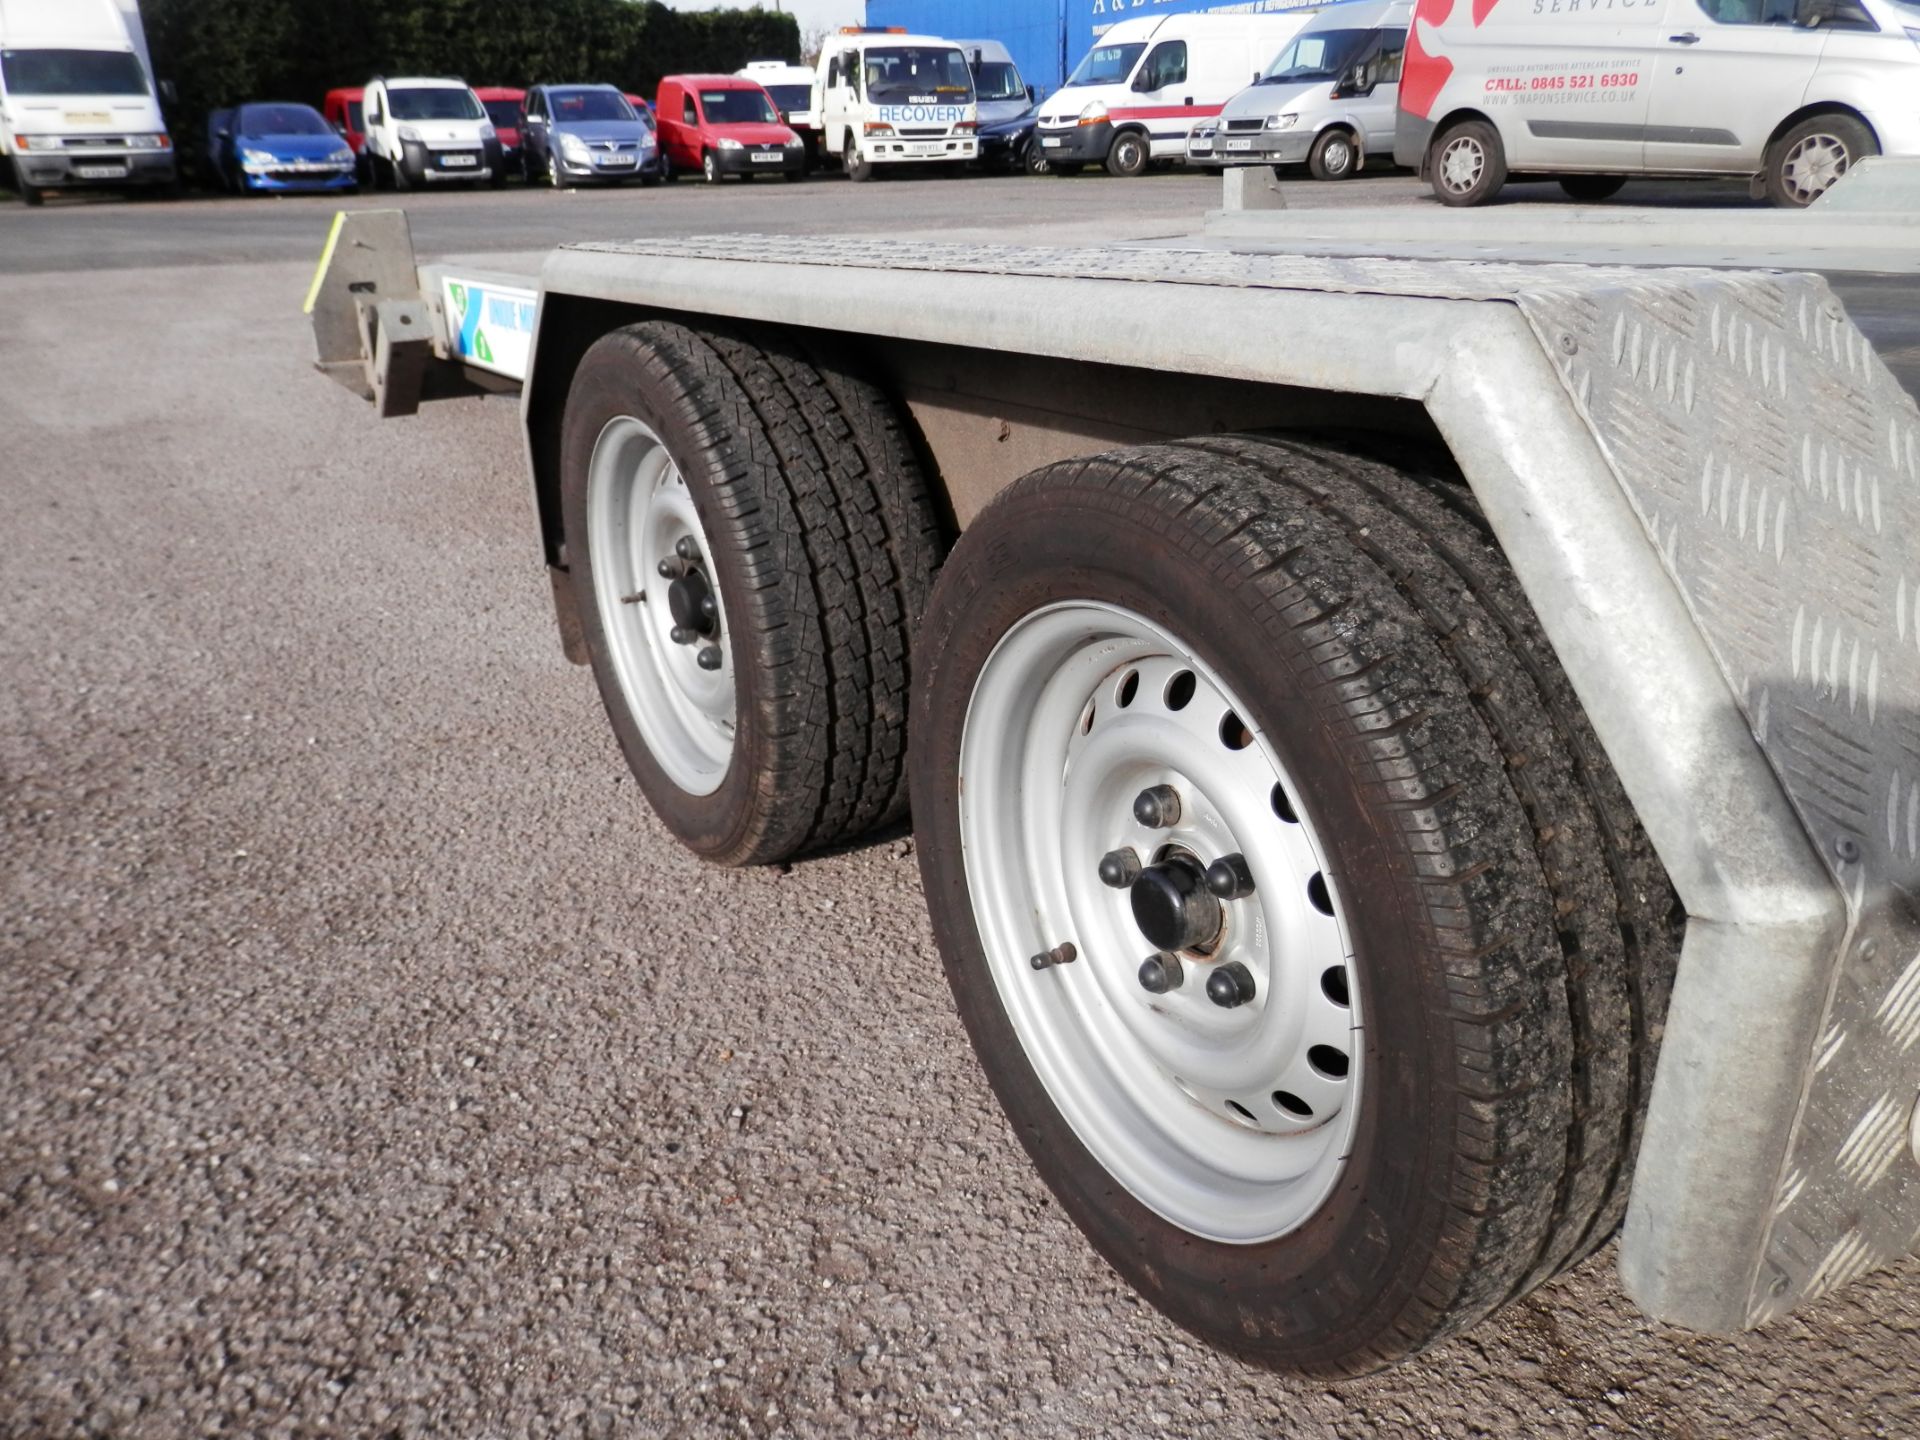 2014 GRAHAM EDWARDS GTX3, 3 TONNE CAR TRAILER, RAMPS & WINCH. GREAT CONDITION THROUGHOUT,NO VAT - Image 13 of 16